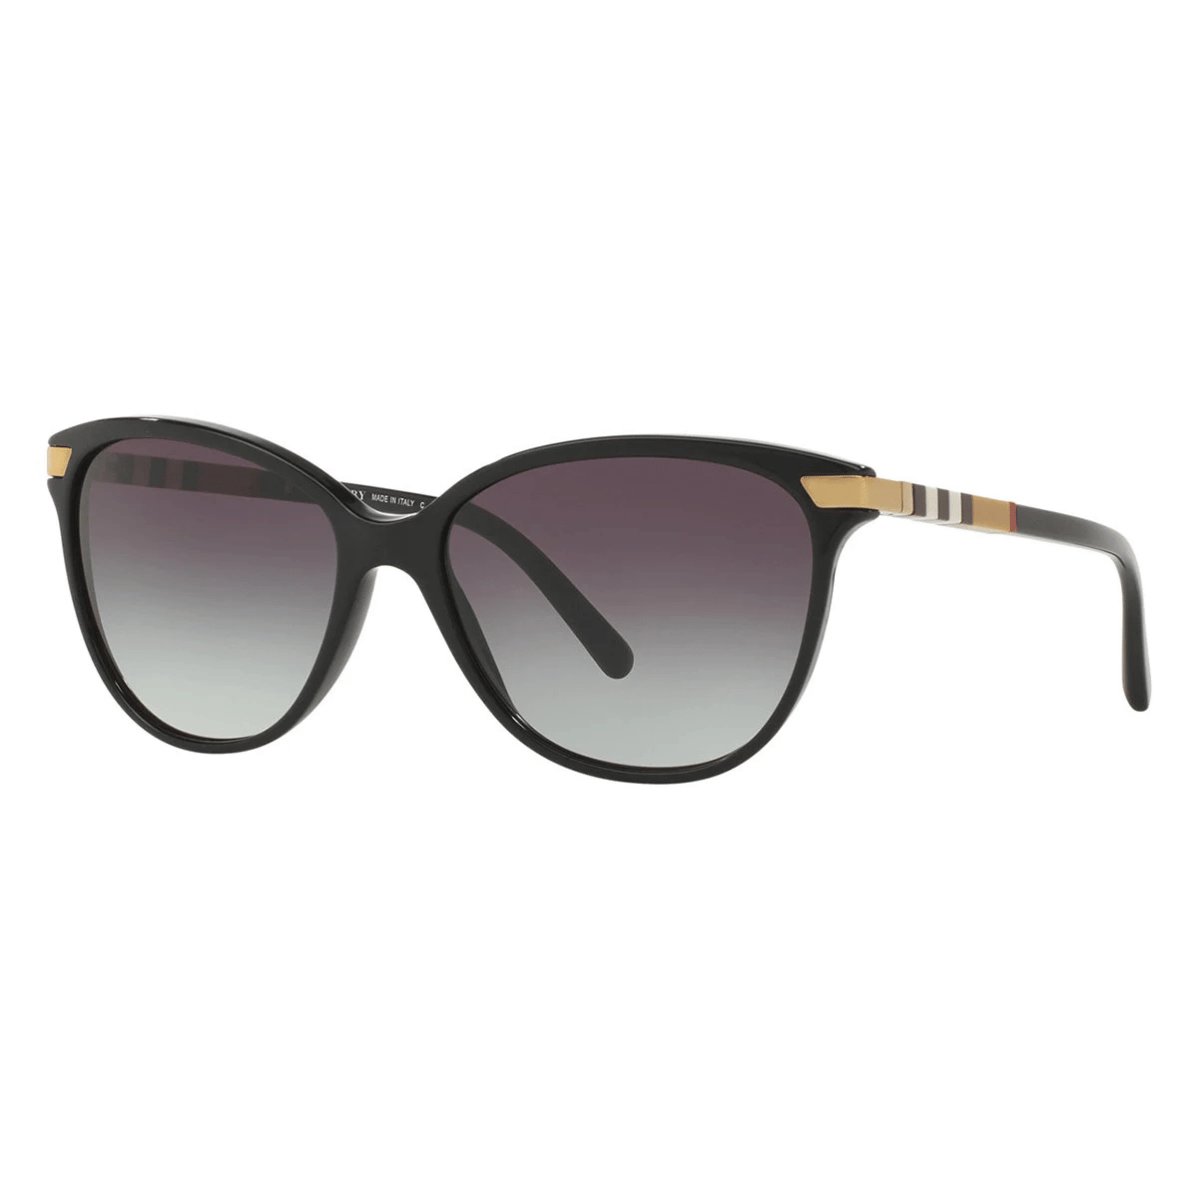 "Elegant grey Burberry BE4216 30018G cat-eye sunglasses displayed, highlighting their polarized lenses, perfect for women seeking both style and protection, available at Optorium."